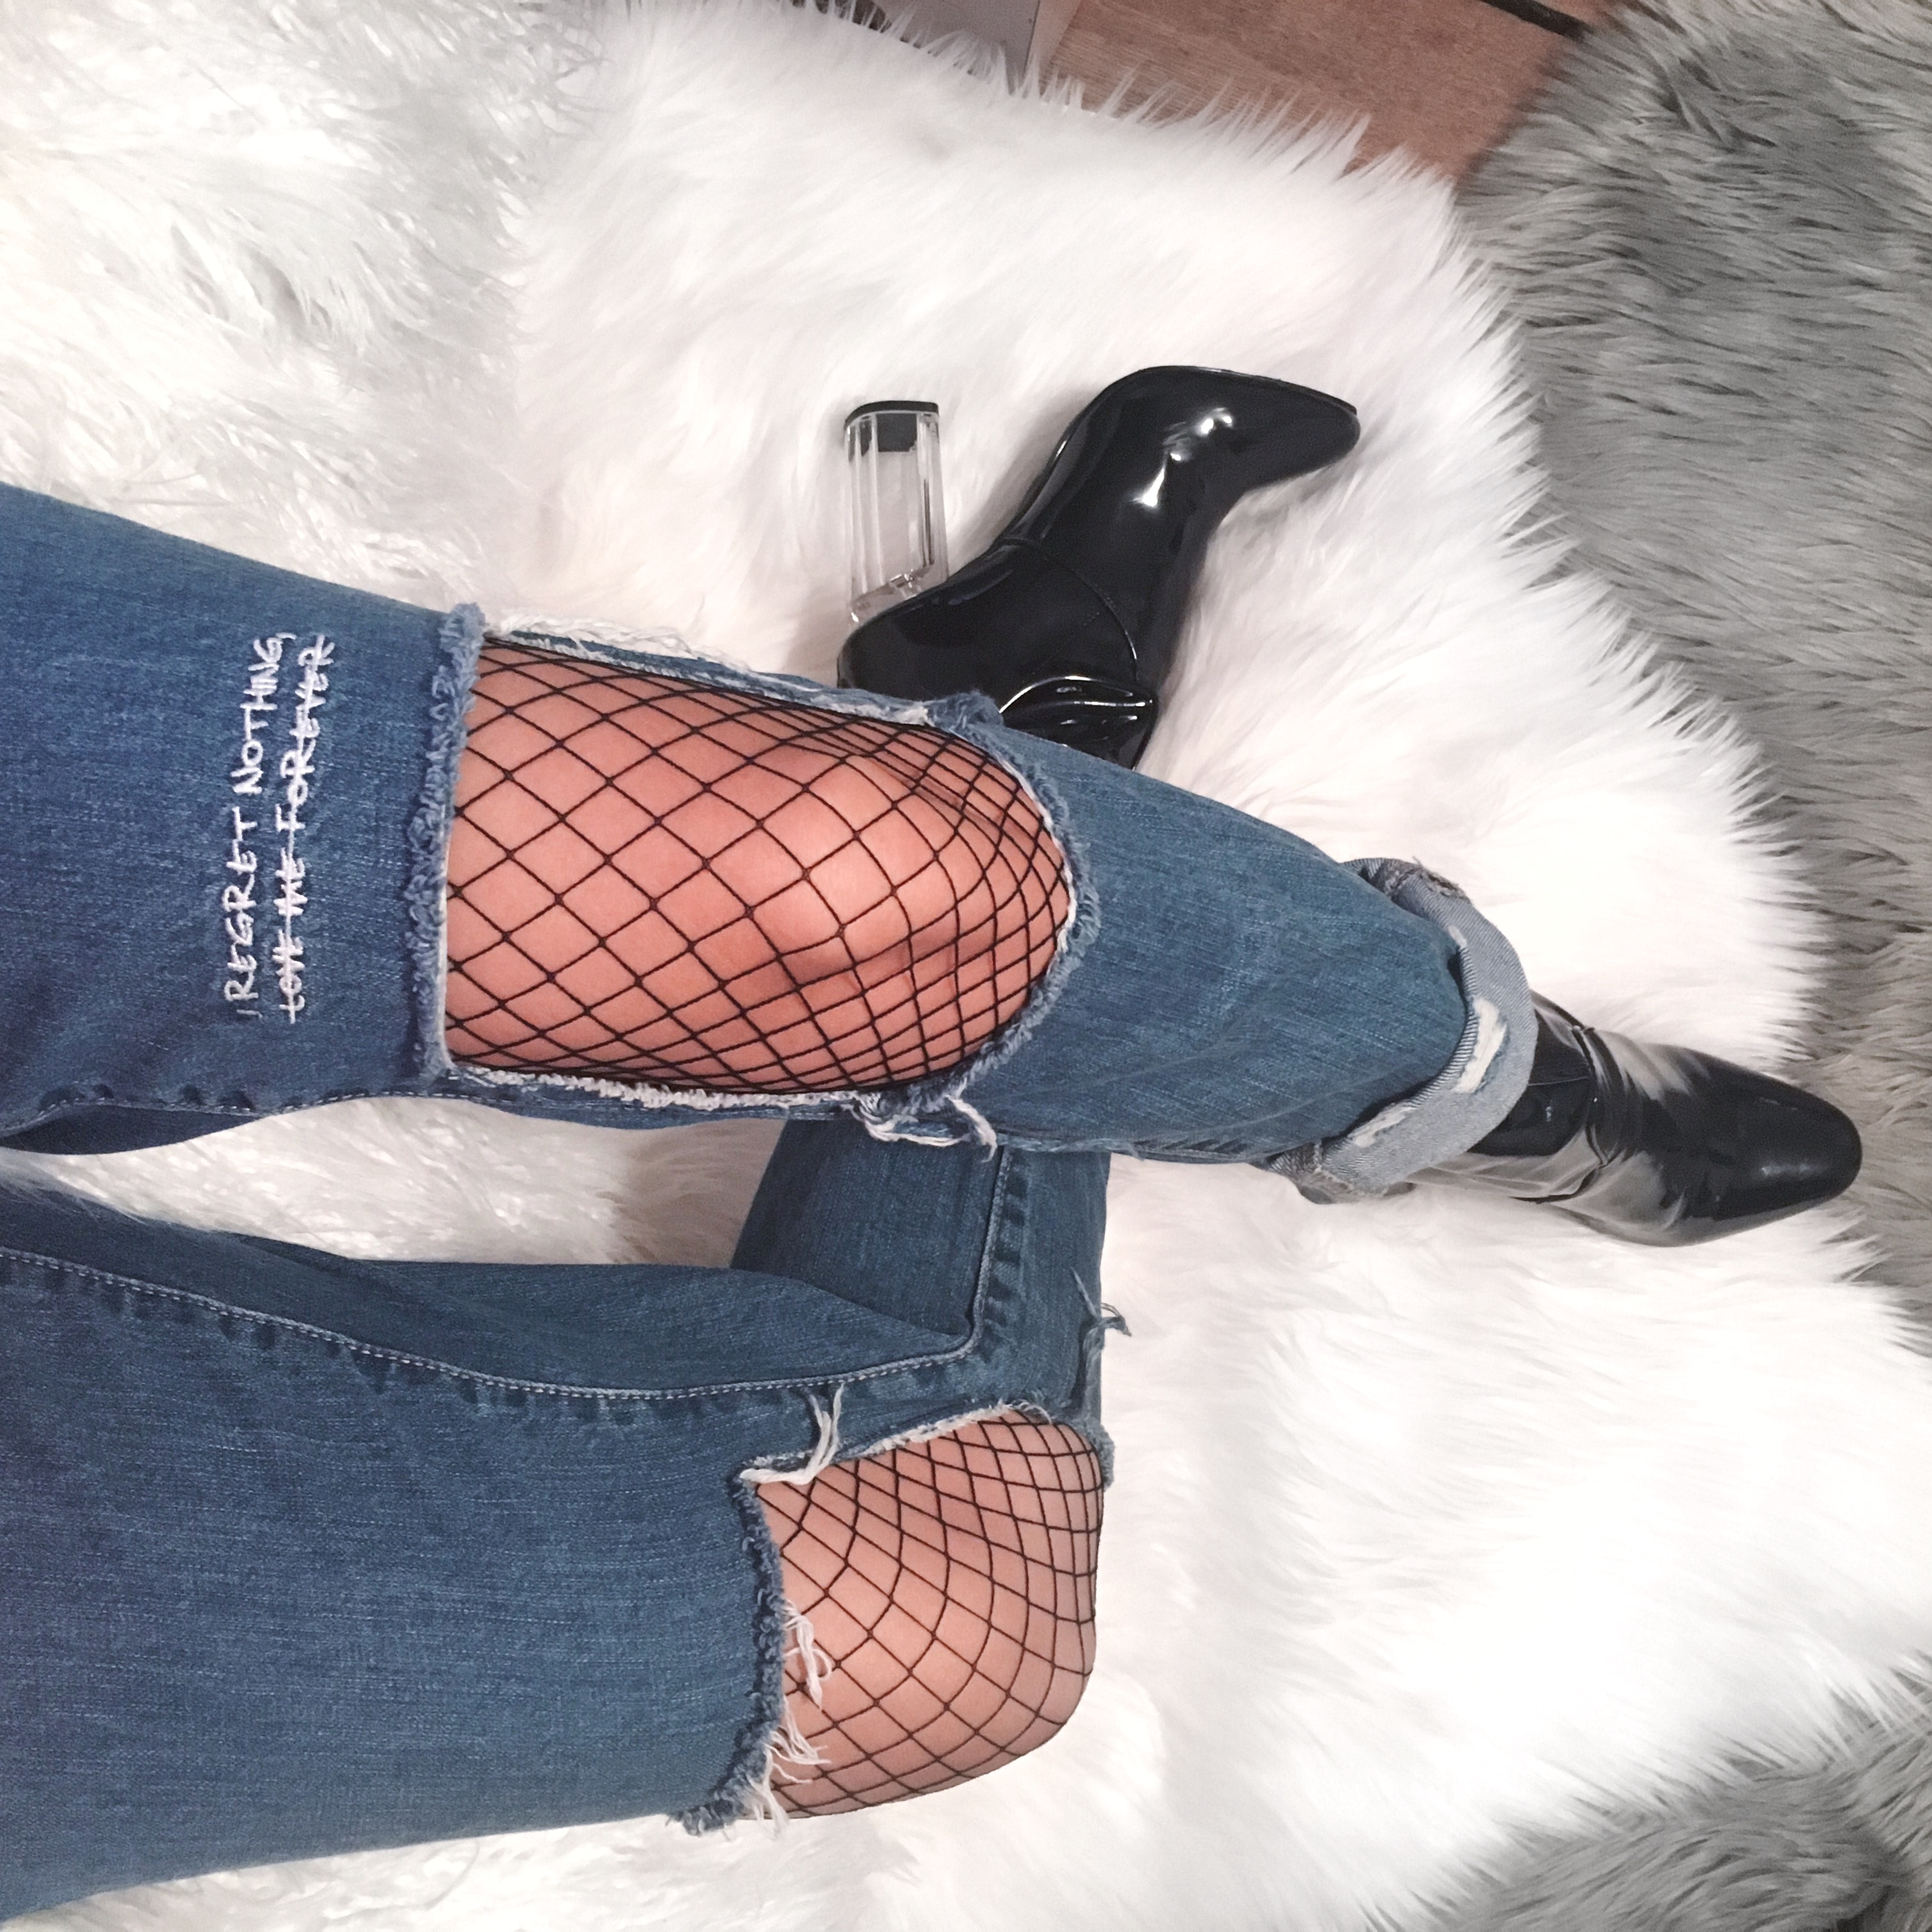 Cello Jeans, I regret nothing, jeans & fishnets